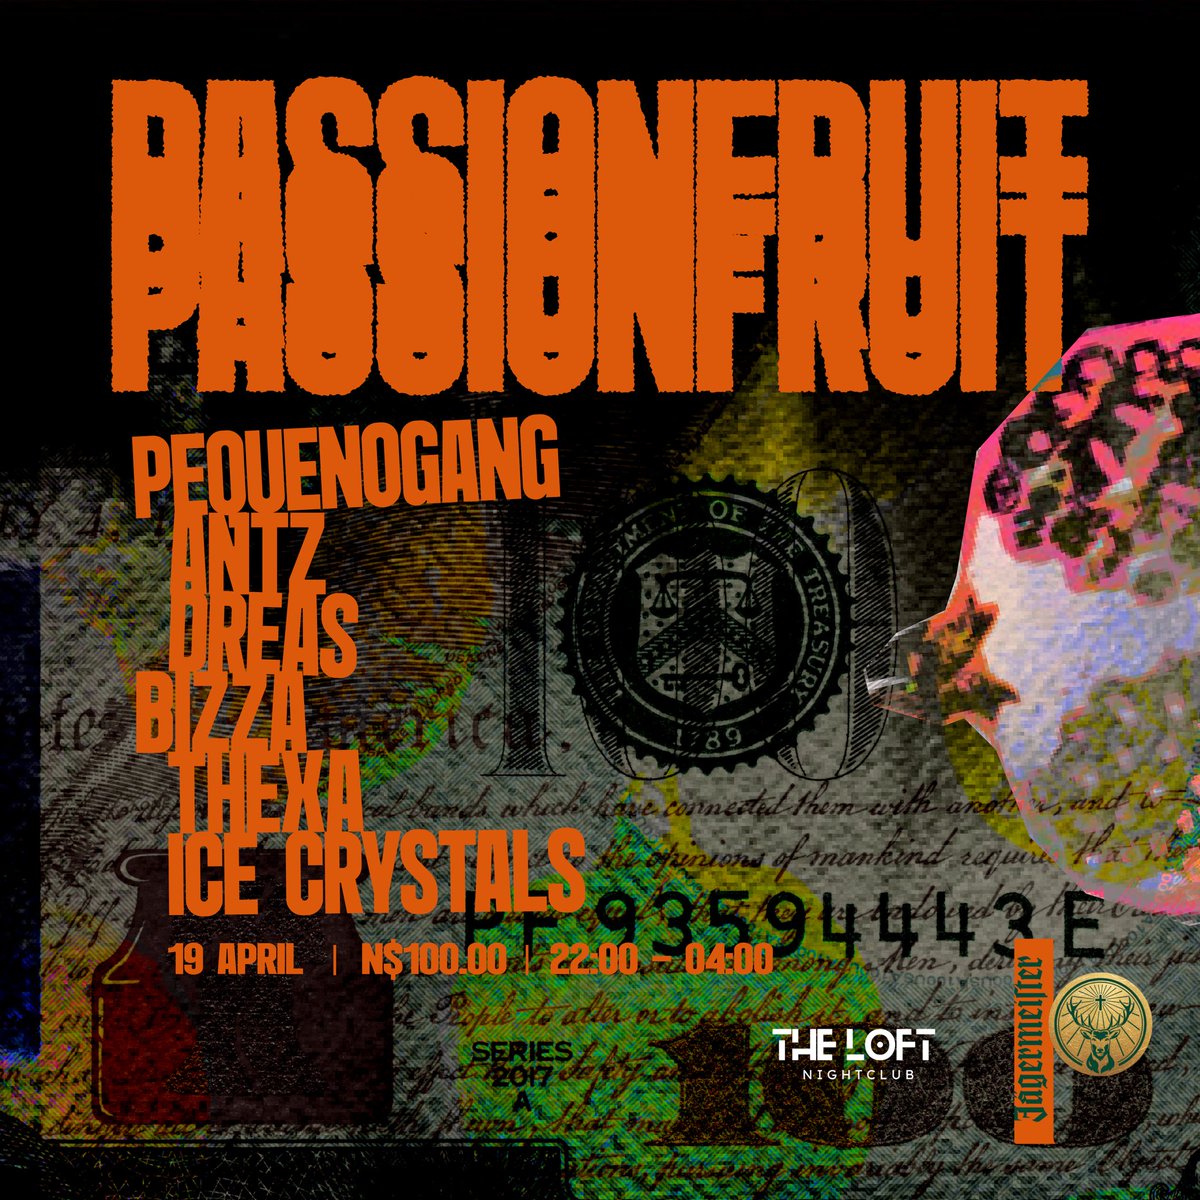 ‘PassionFruit’ going UP this Friday at The Loft 🔥

DJ Line up serving Gqom | Afrohouse | Amapiano | Afrobeats & Hi Hop 🥶 

Entrance: N$100